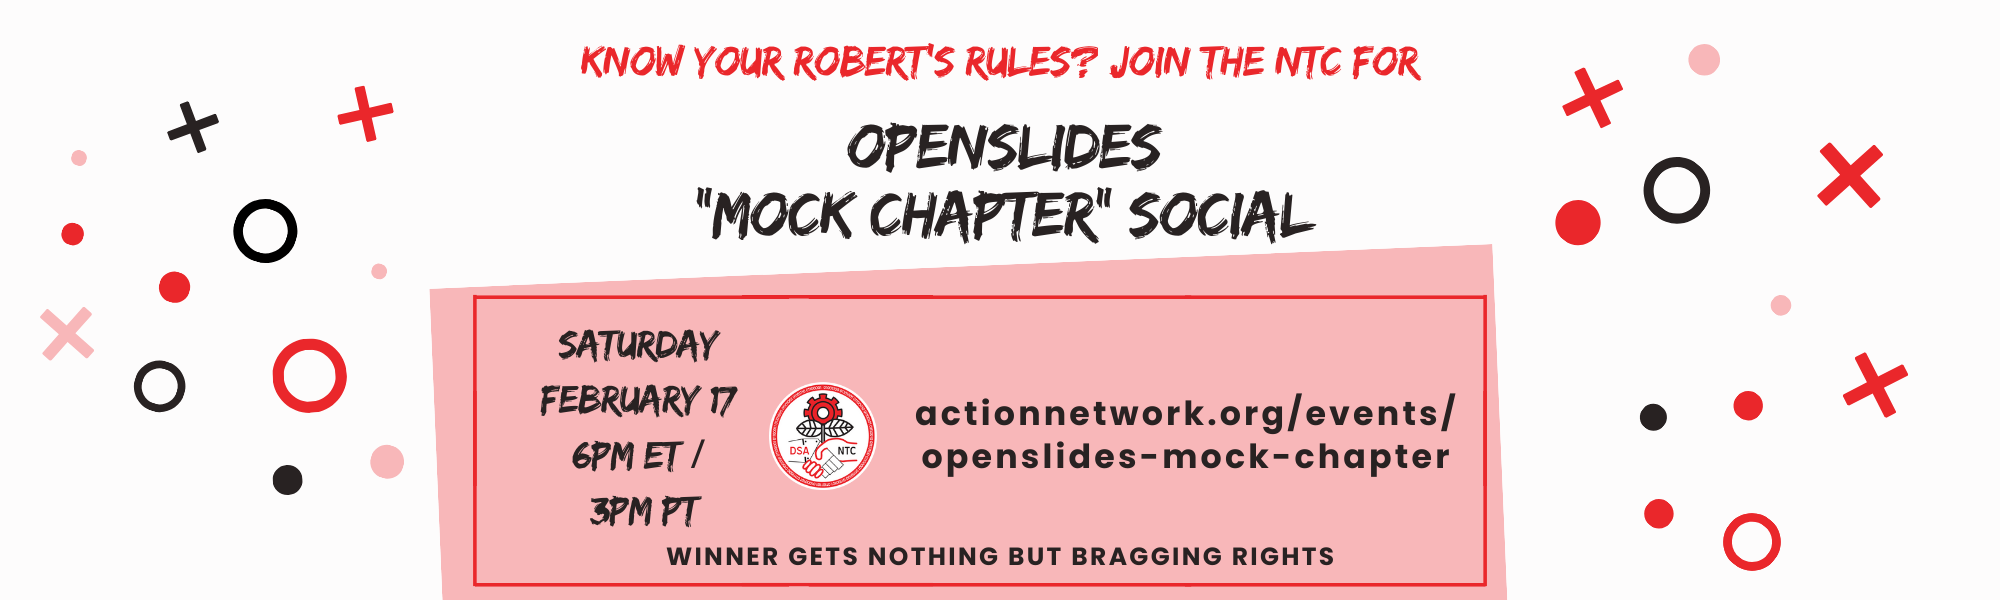 Know Your Robert's Rules? Join the NTC for OpenSlides Mock Chapter Social. Saturday, February 17, 6PM ET / 3PM PT https://actionnetwork.org/events/openslides-mock-chapter Winner Gets Nothing But Bragging Rights